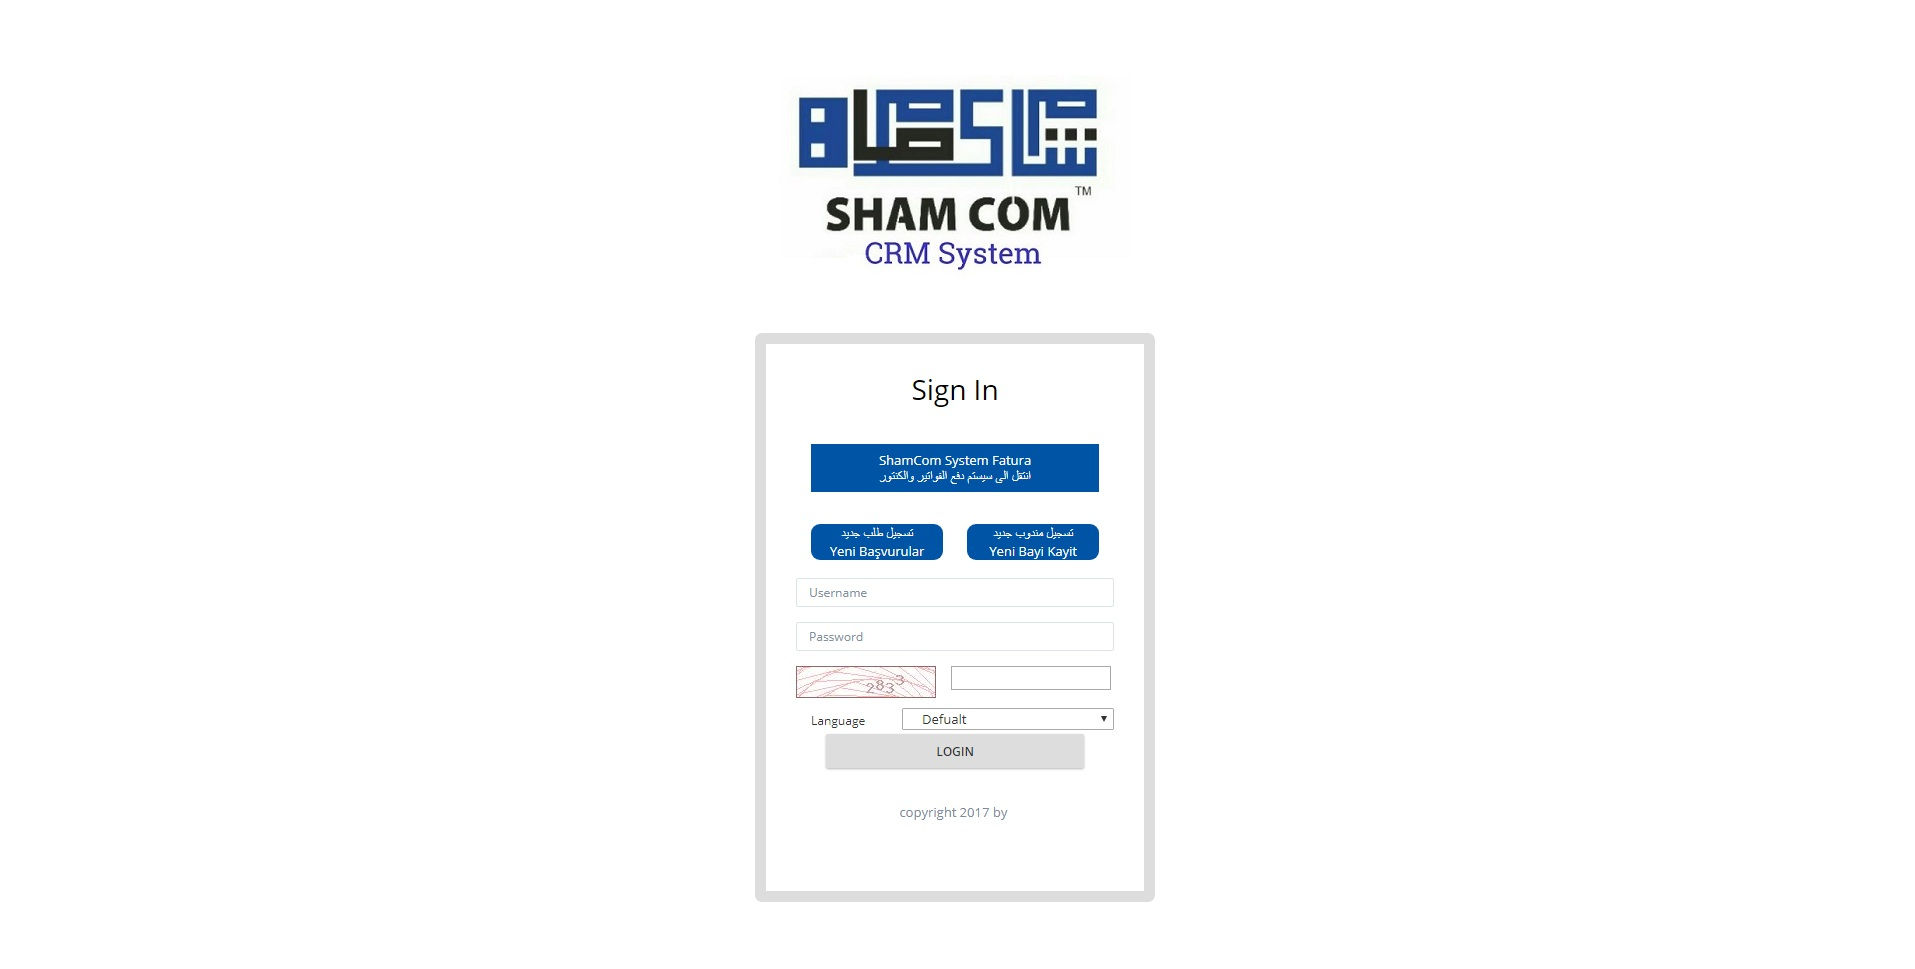 ShamCom CRM System will manage customers and employees